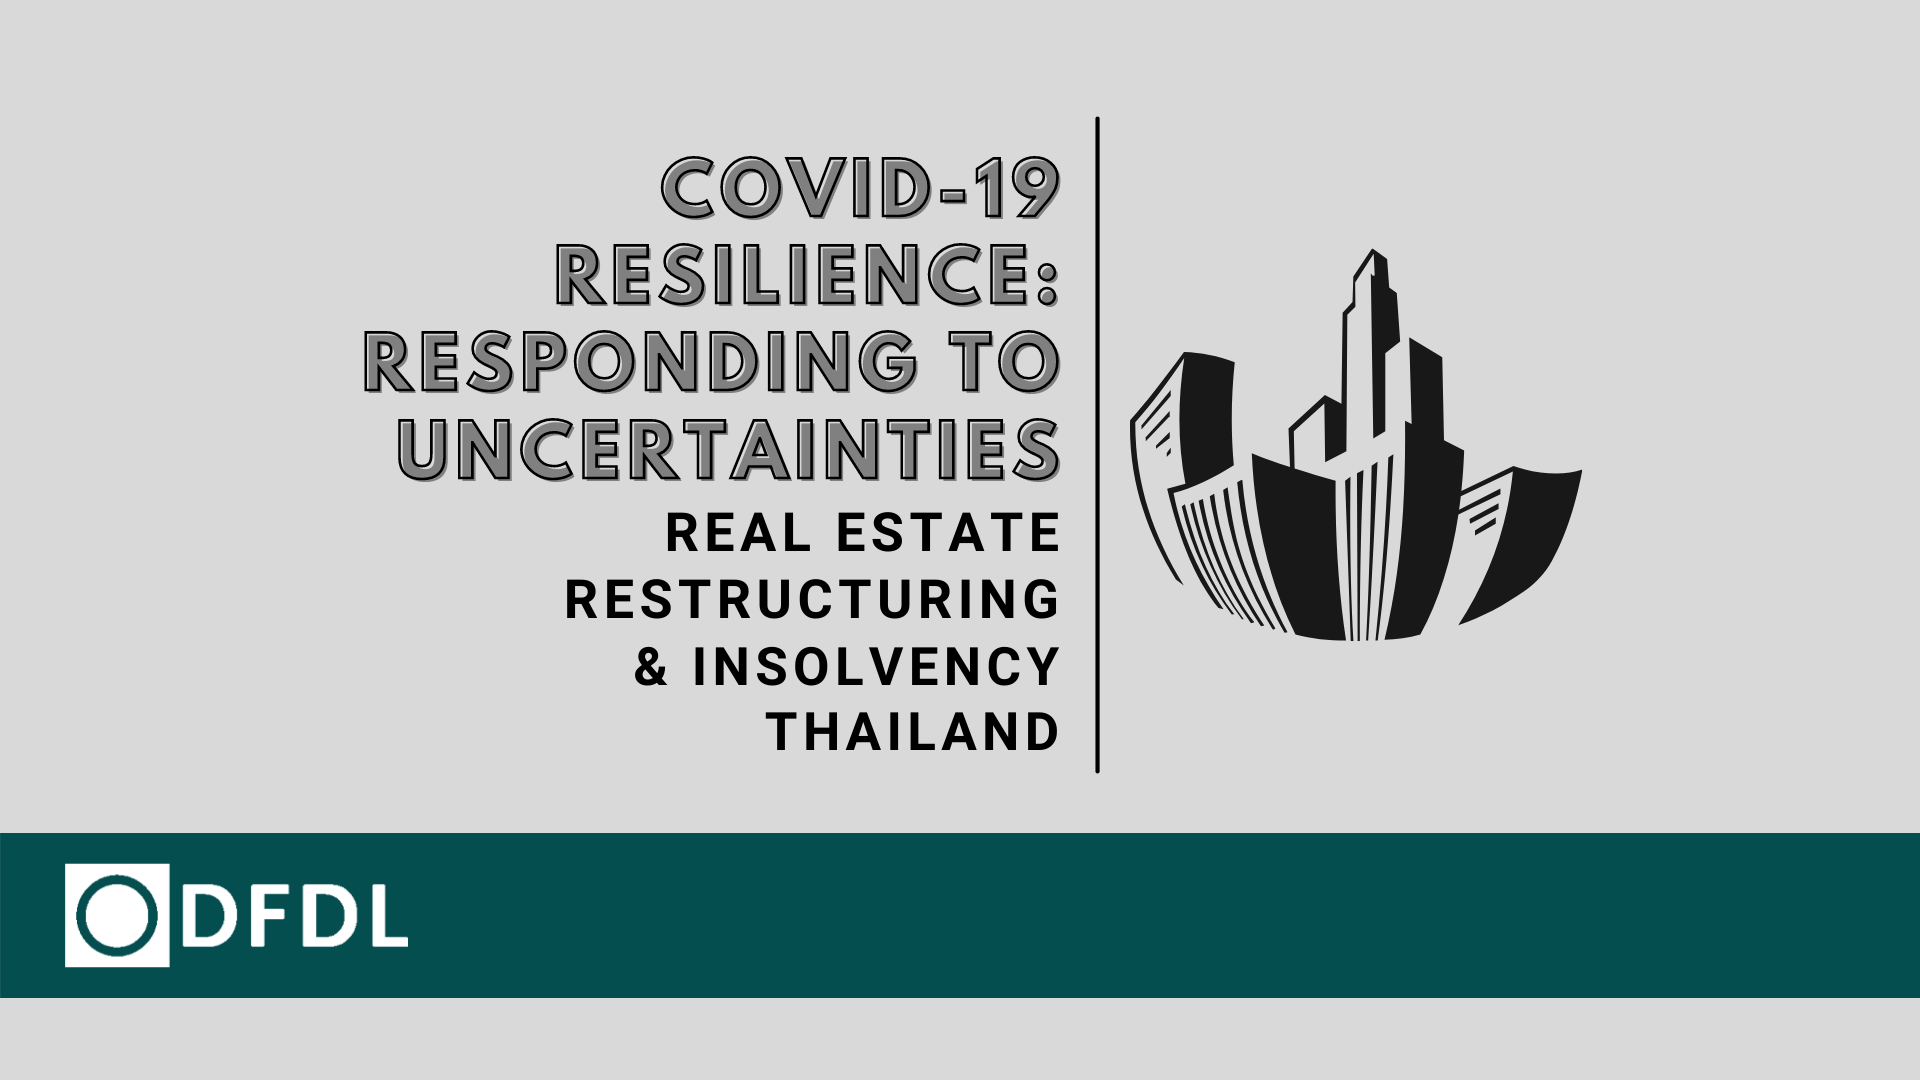 Real Estate Restructuring & Insolvency – COVID19 Resilience: Responding to Uncertainties in Thailand